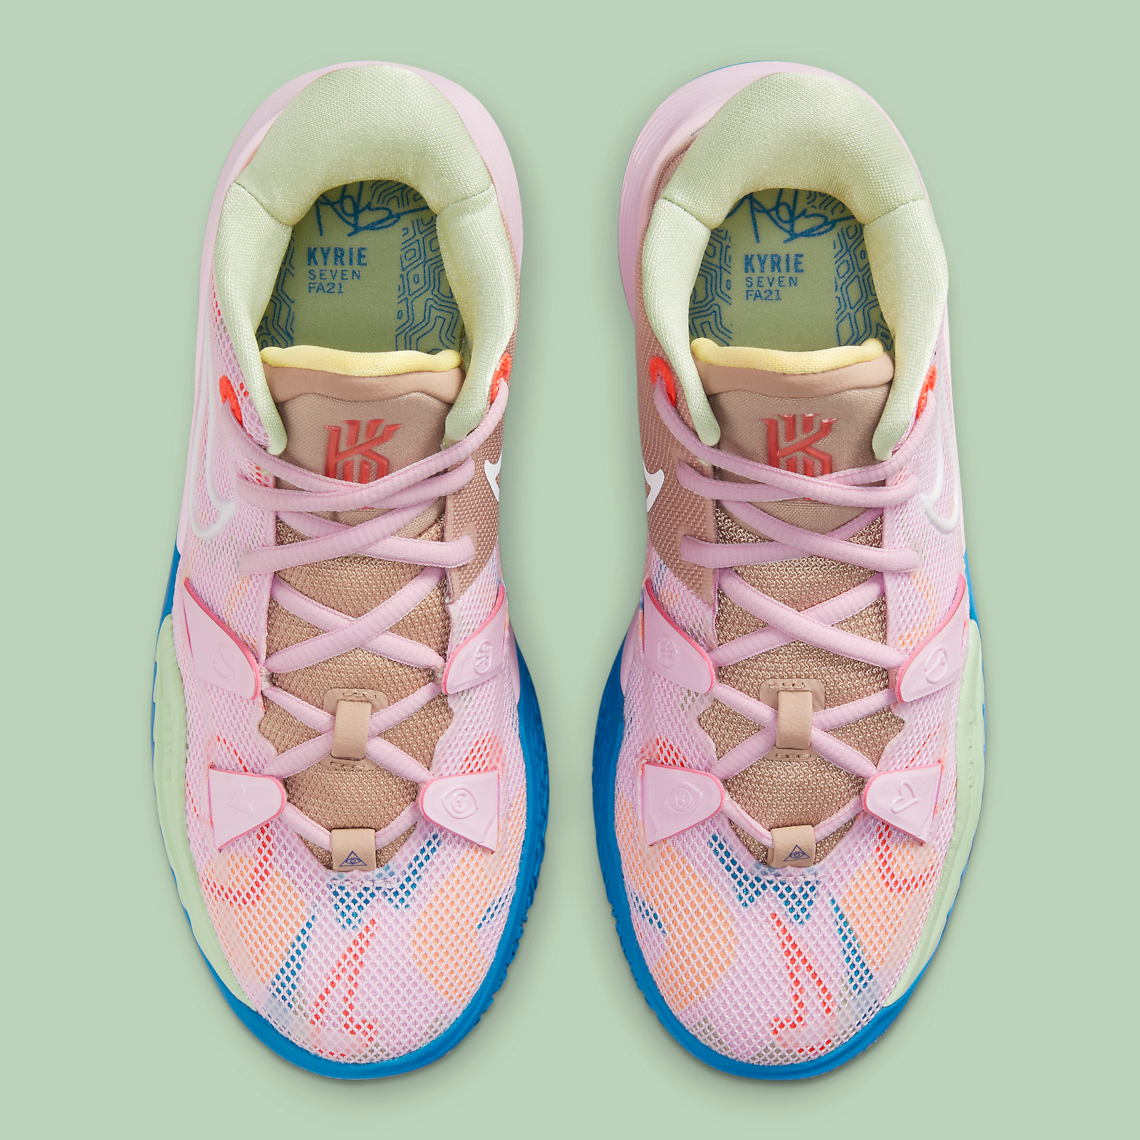 Nike Kyrie 7 1 World 1 People CQ9326-600 Release | SneakerNews.com